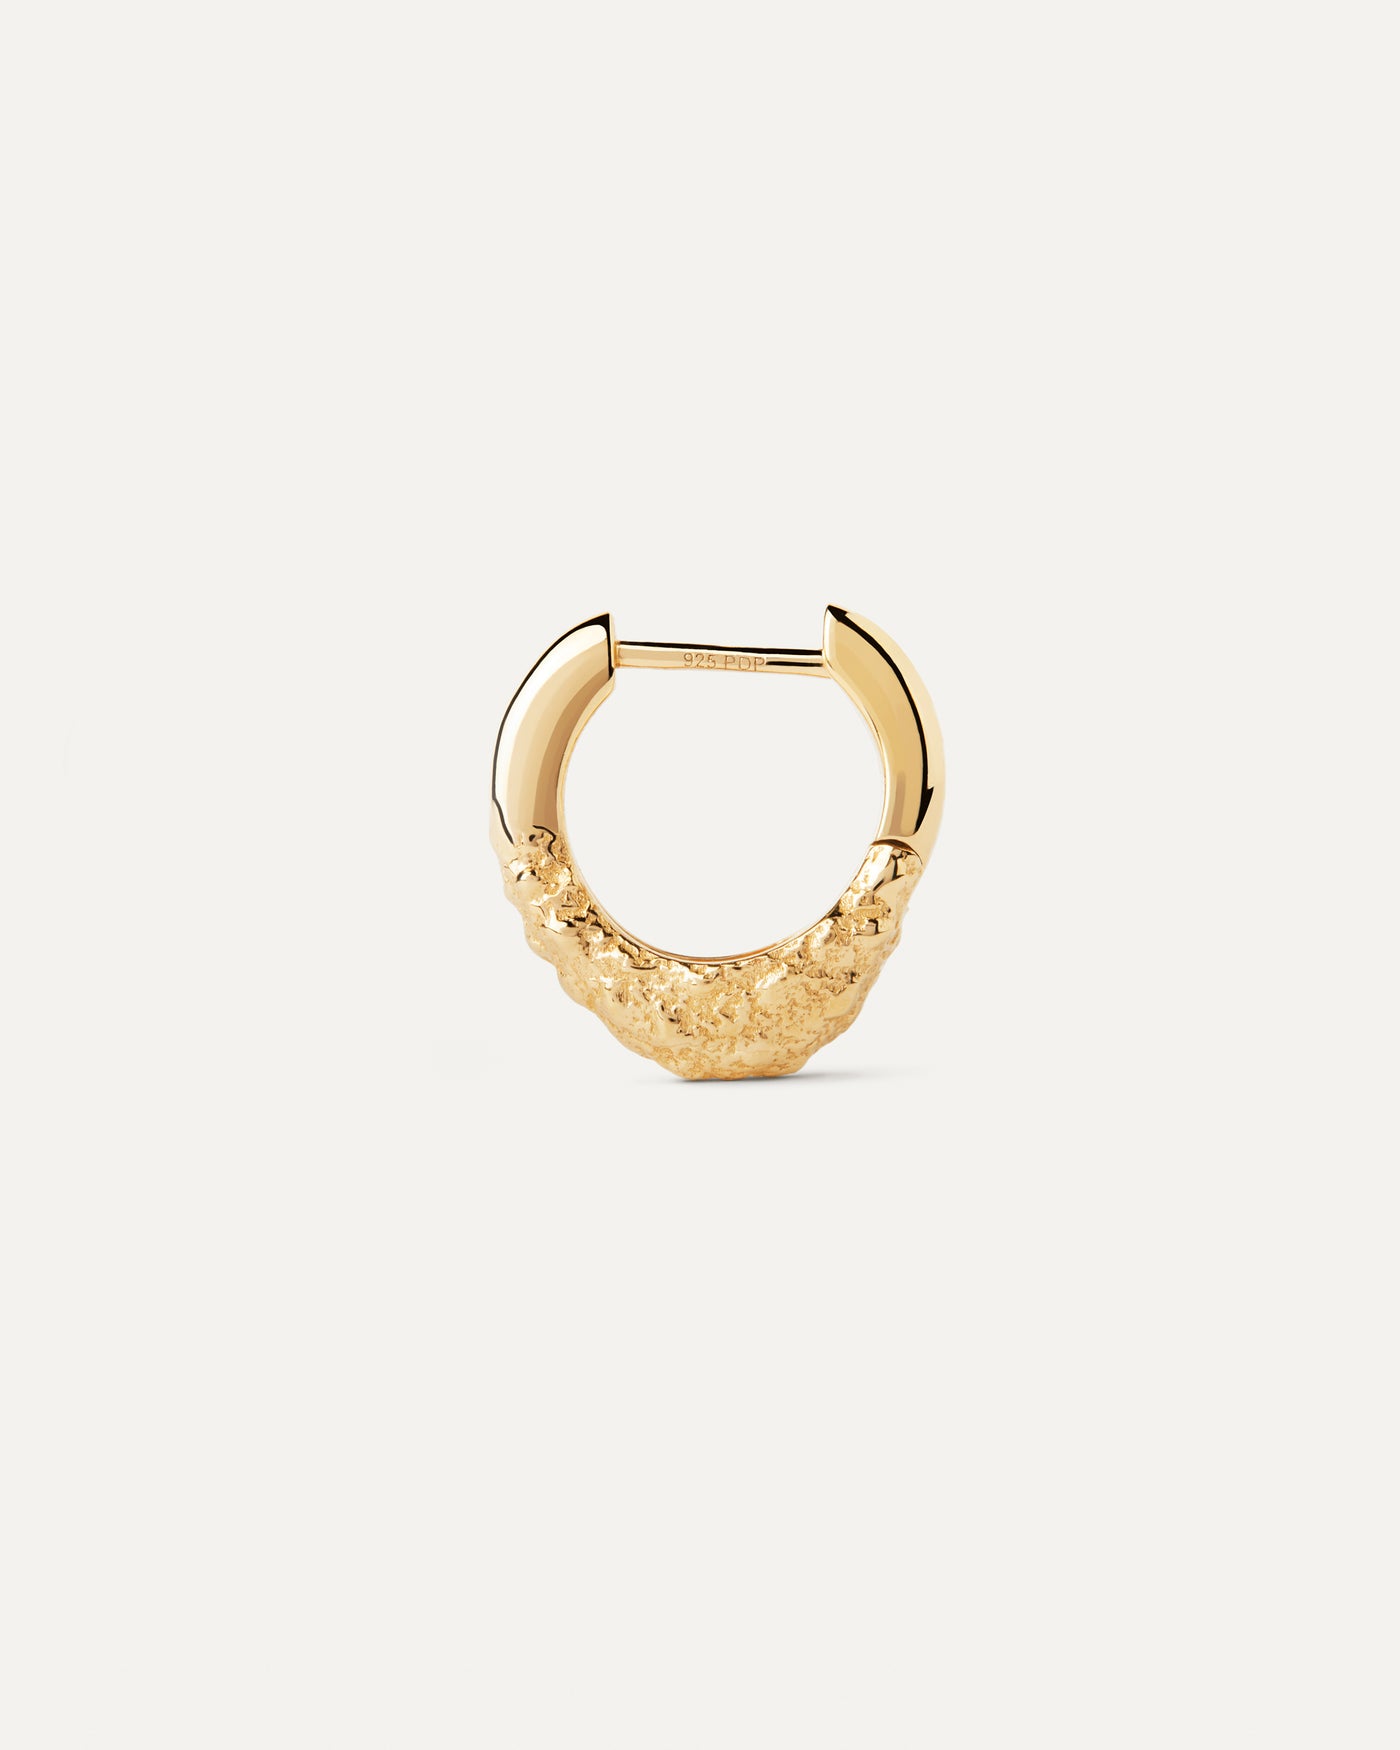 2023 Selection | Duna Single Hoop. Gold-plated fluid shape single hoop with molten texture detail and a drop pendant. Get the latest arrival from PDPAOLA. Place your order safely and get this Best Seller. Free Shipping.